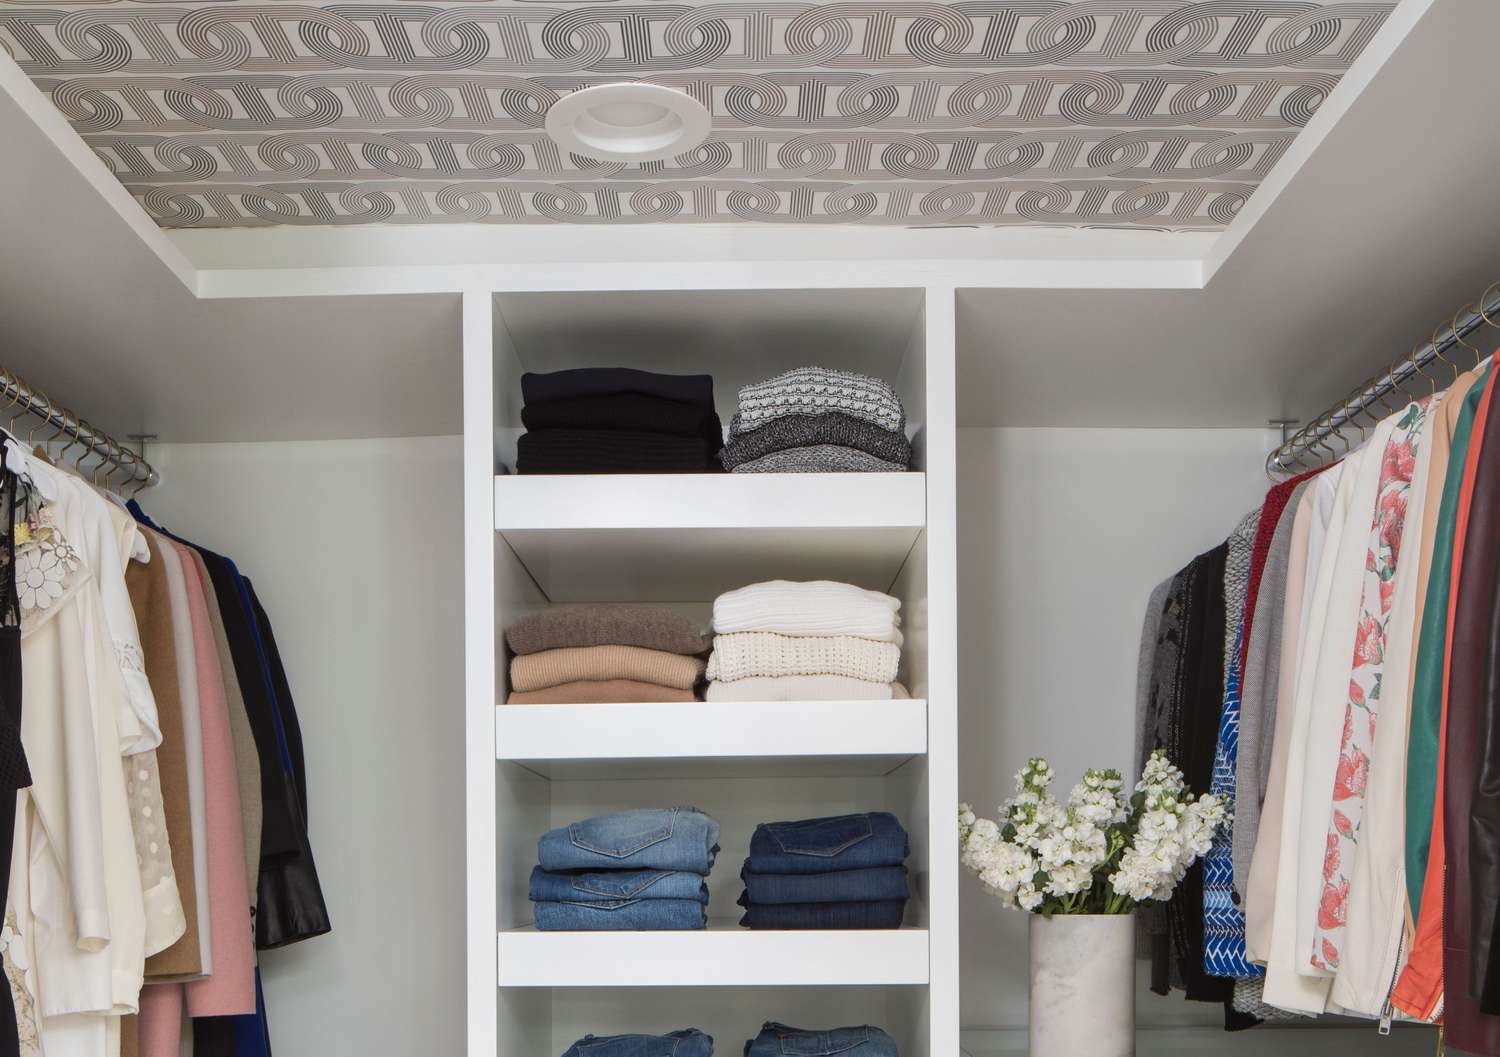 wallpapered closet ceiling